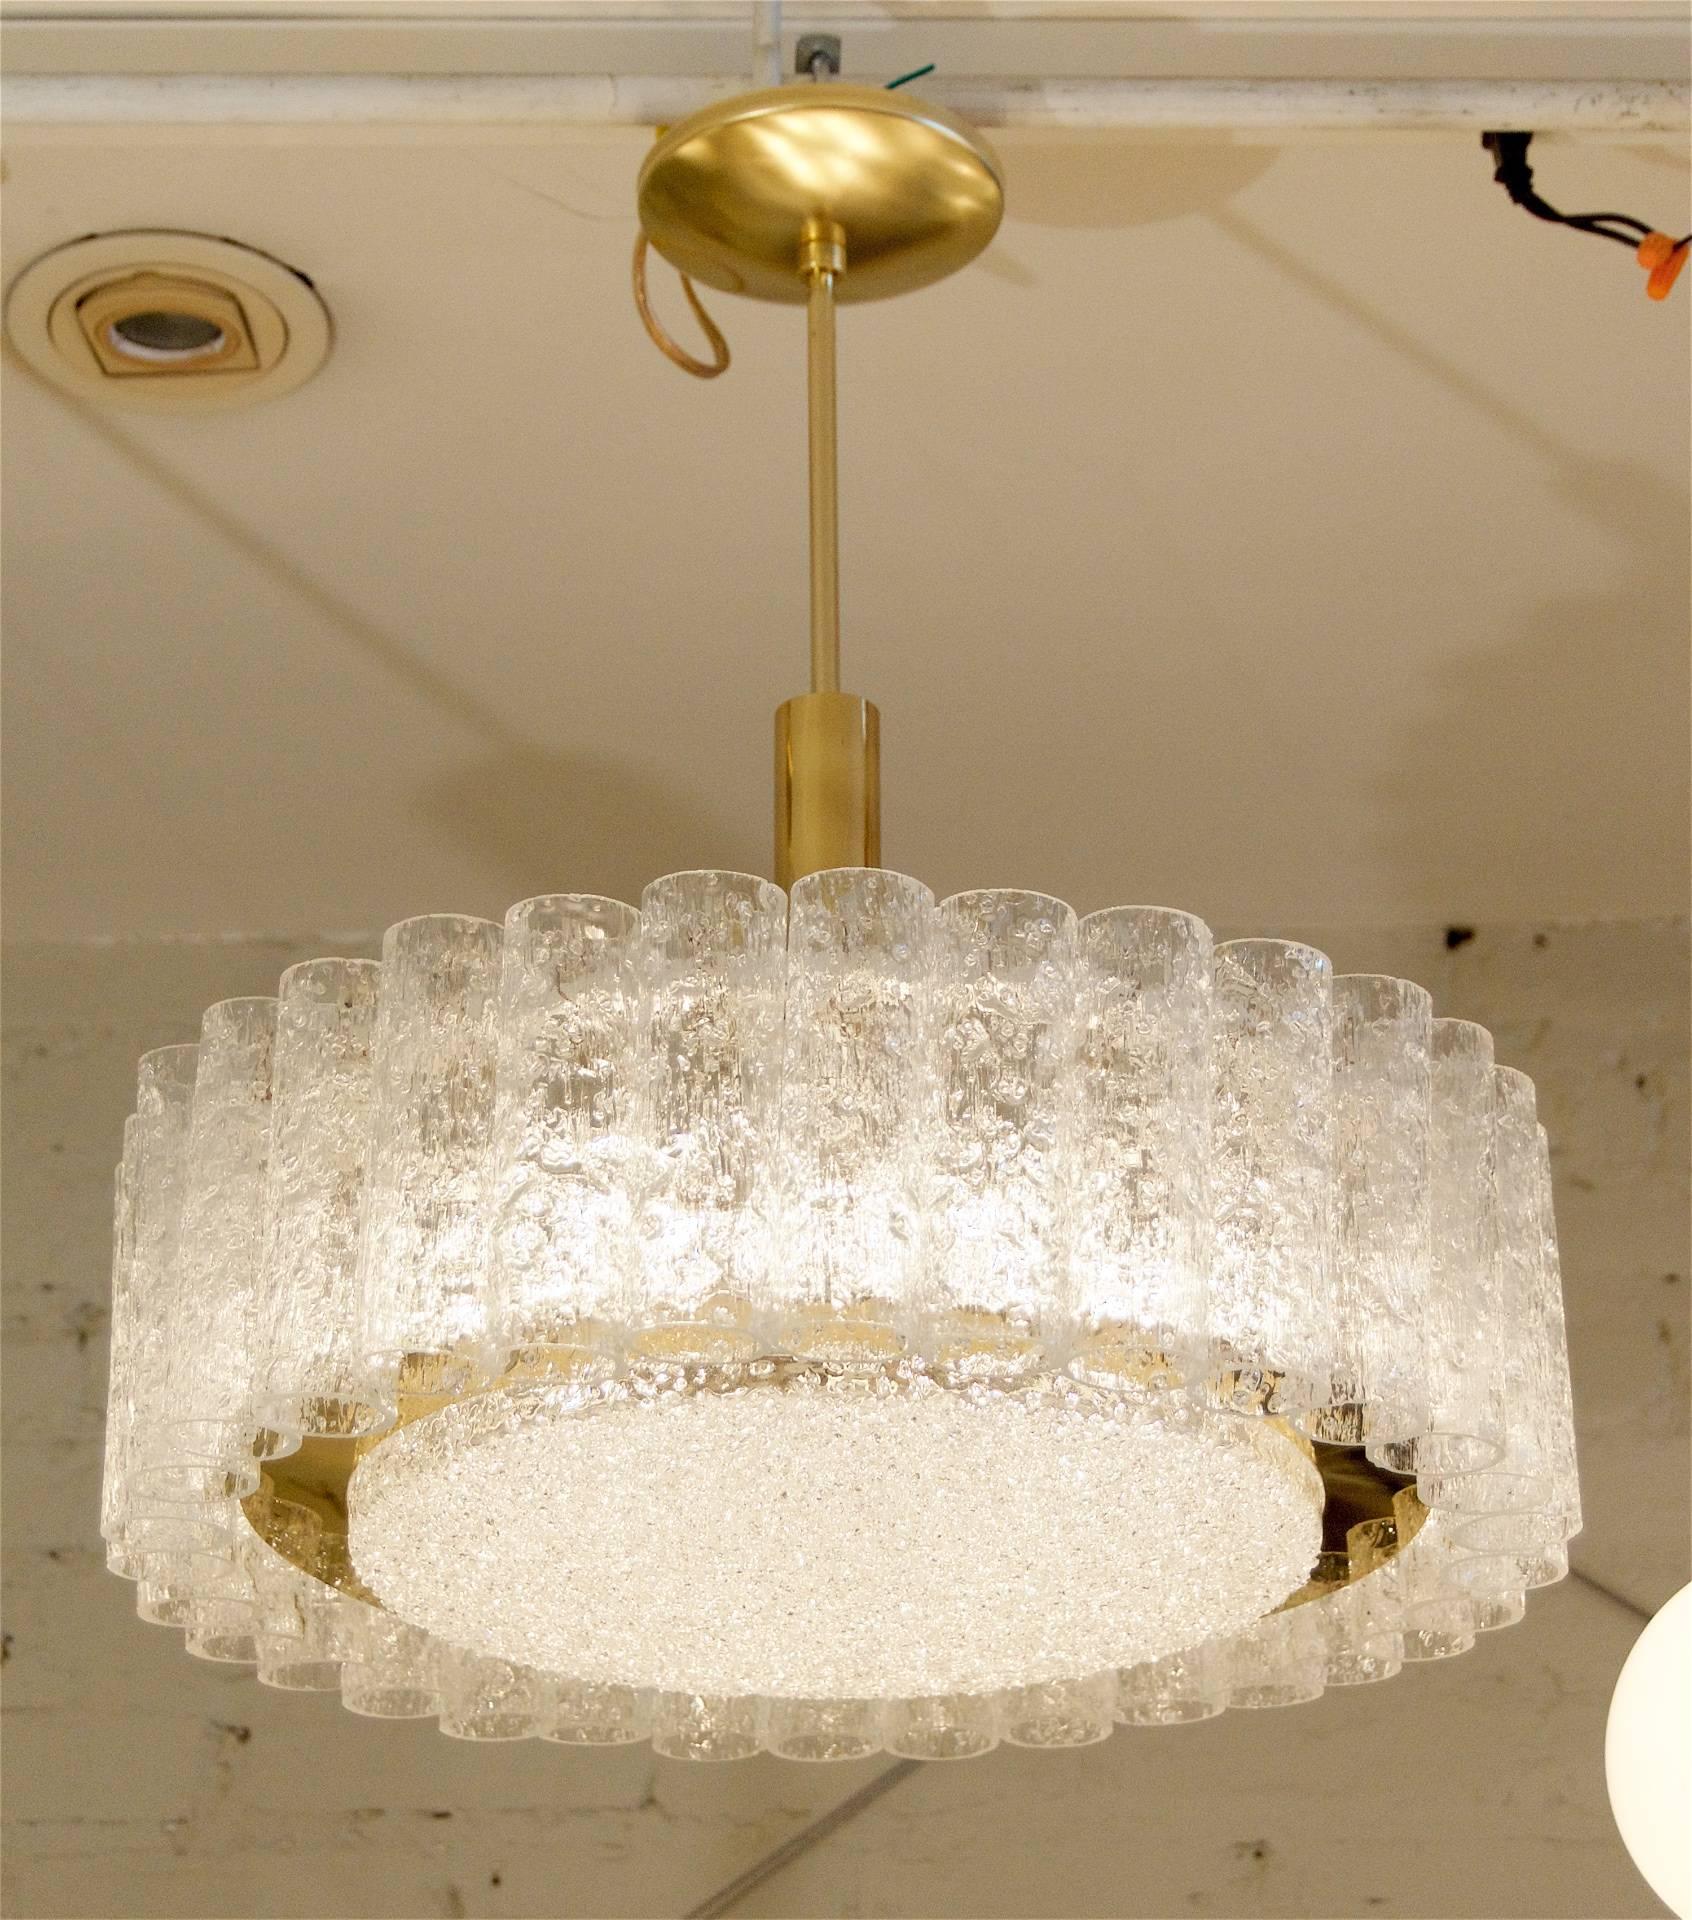 Elegant chandelier with organic glass tubes and a centre glass disc surrounded by a band of brass.

Takes six E-14 base bulbs up to 40 watts each. New wiring.

Height listed is of chandelier body only; height as currently hung is 21